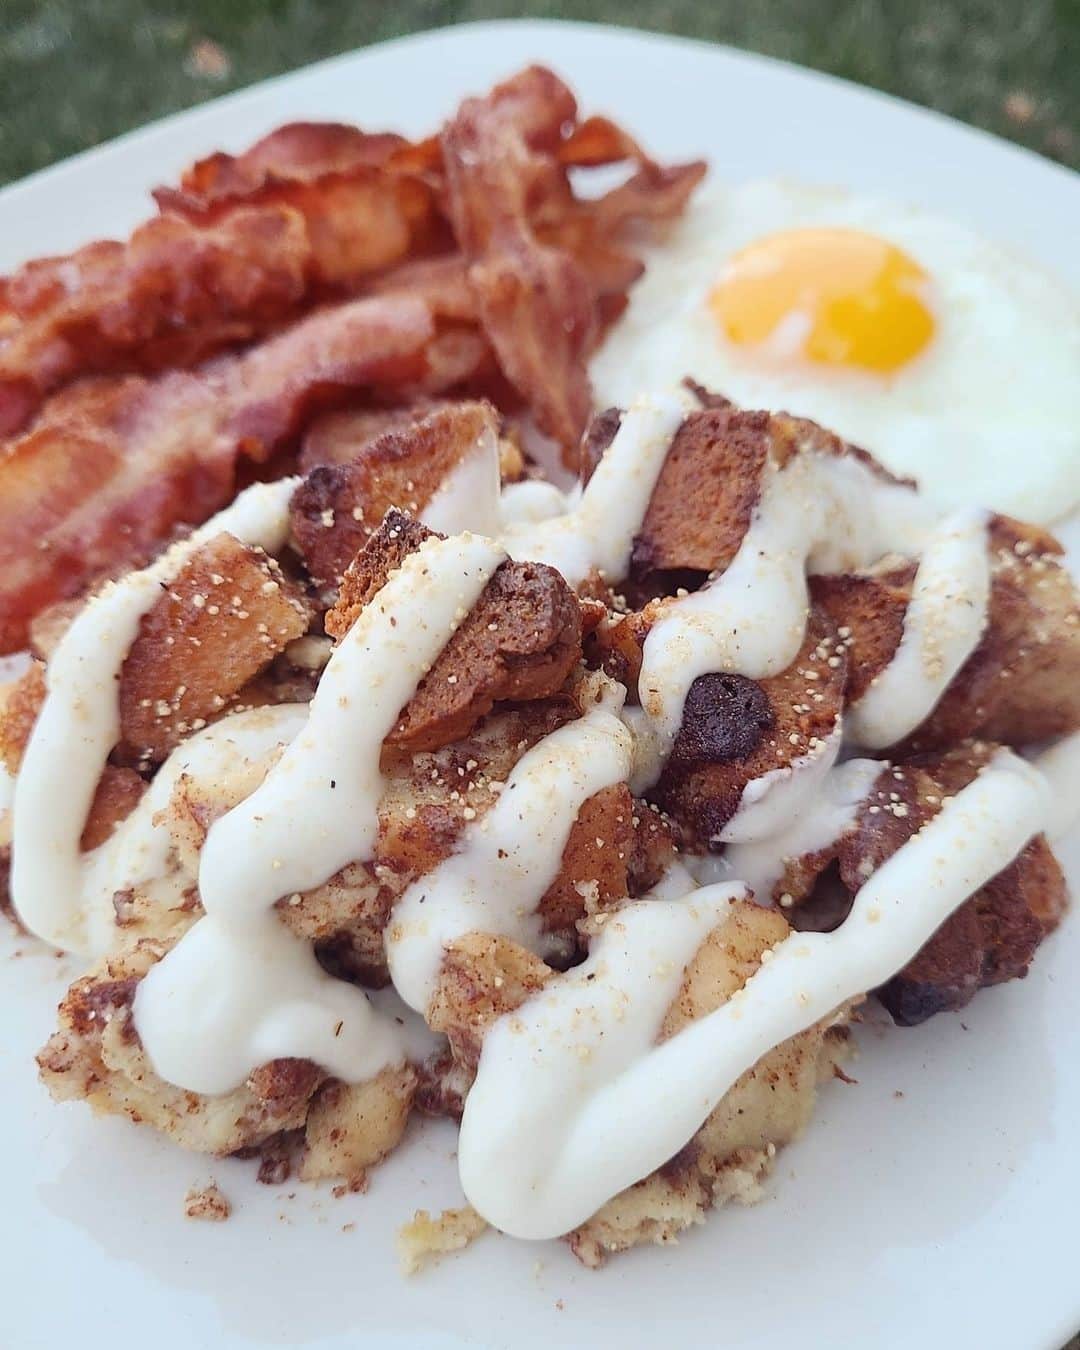 Flavorgod Seasoningsさんのインスタグラム写真 - (Flavorgod SeasoningsInstagram)「KETO CINNAMON ROLL CASSEROLE 🥓 by @lowkarbkhaleesi Topped with Flavor God Buttery Cinnamon Roll⁠ .⁠ Add delicious flavors to your meals!⬇️⁠ Click link in the bio -> @flavorgod  www.flavorgod.com⁠ -⁠ All the flavor without having to roll any dough! This dish would be perfect for #ChristmasMorning 🎄 Assemble the night before and when you wake up it's ready to bake⁠ .⁠ .⁠ 1 loaf low carb bread** (approximately 4 cups cubed)⁠ 4 Tbsp butter, softened⁠ 1 Tbsp cinnamon⁠ 1/2 cup So Nourished granular sweetener (💥 10% off link in bio)⁠ 3 eggs⁠ 1/2 cup unsweetened vanilla almond milk⁠ 1/2 cup heavy cream⁠ 1/2 tsp vanilla⁠ pinch of salt⁠ 1 tsp Flavor God buttery cinnamon roll⁠ ▪︎▪︎▪︎⁠ Frosting:⁠ 8 oz Philadelphia cream cheese, softened⁠ 1 cup So Nourished powdered sweetener (💥 10% off link in bio)⁠ 1/4 cup unsweetened vanilla almond milk⁠ ▪︎▪︎▪︎⁠ 🍥 Cut bread into 1 inch cubes. Mix together butter, granular sweetener, and cinnamon until it turns into a wet sandy texture⁠ 🍥 Place 2 cups bread cubes into a greased 9x9 baking dish. Top with half the cinnamon mixture. Layer the remaining bread cubes and cinnamon mixture on top⁠ 🍥 Whisk together eggs, unsweetened vanilla almond milk, heavy cream, vanilla, salt, and buttery cinnamon roll. Pour evenly over bread cubes⁠ 🍥 Let sit in the fridge for at least 6-8 hours. Bake at 375° for 35-40 minutes or until golden brown. Let cool for 10 minutes⁠ 🍥 Beat together cream cheese, powdered sweetener, and almond milk. Spread on top of casserole and serve!⁠ -⁠ Flavor God Seasonings are:⁠ 💥ZERO CALORIES PER SERVING⁠ 🔥0 SUGAR PER SERVING ⁠ 💥GLUTEN FREE⁠ 🔥KETO FRIENDLY⁠ 💥PALEO FRIENDLY⁠」12月5日 22時01分 - flavorgod